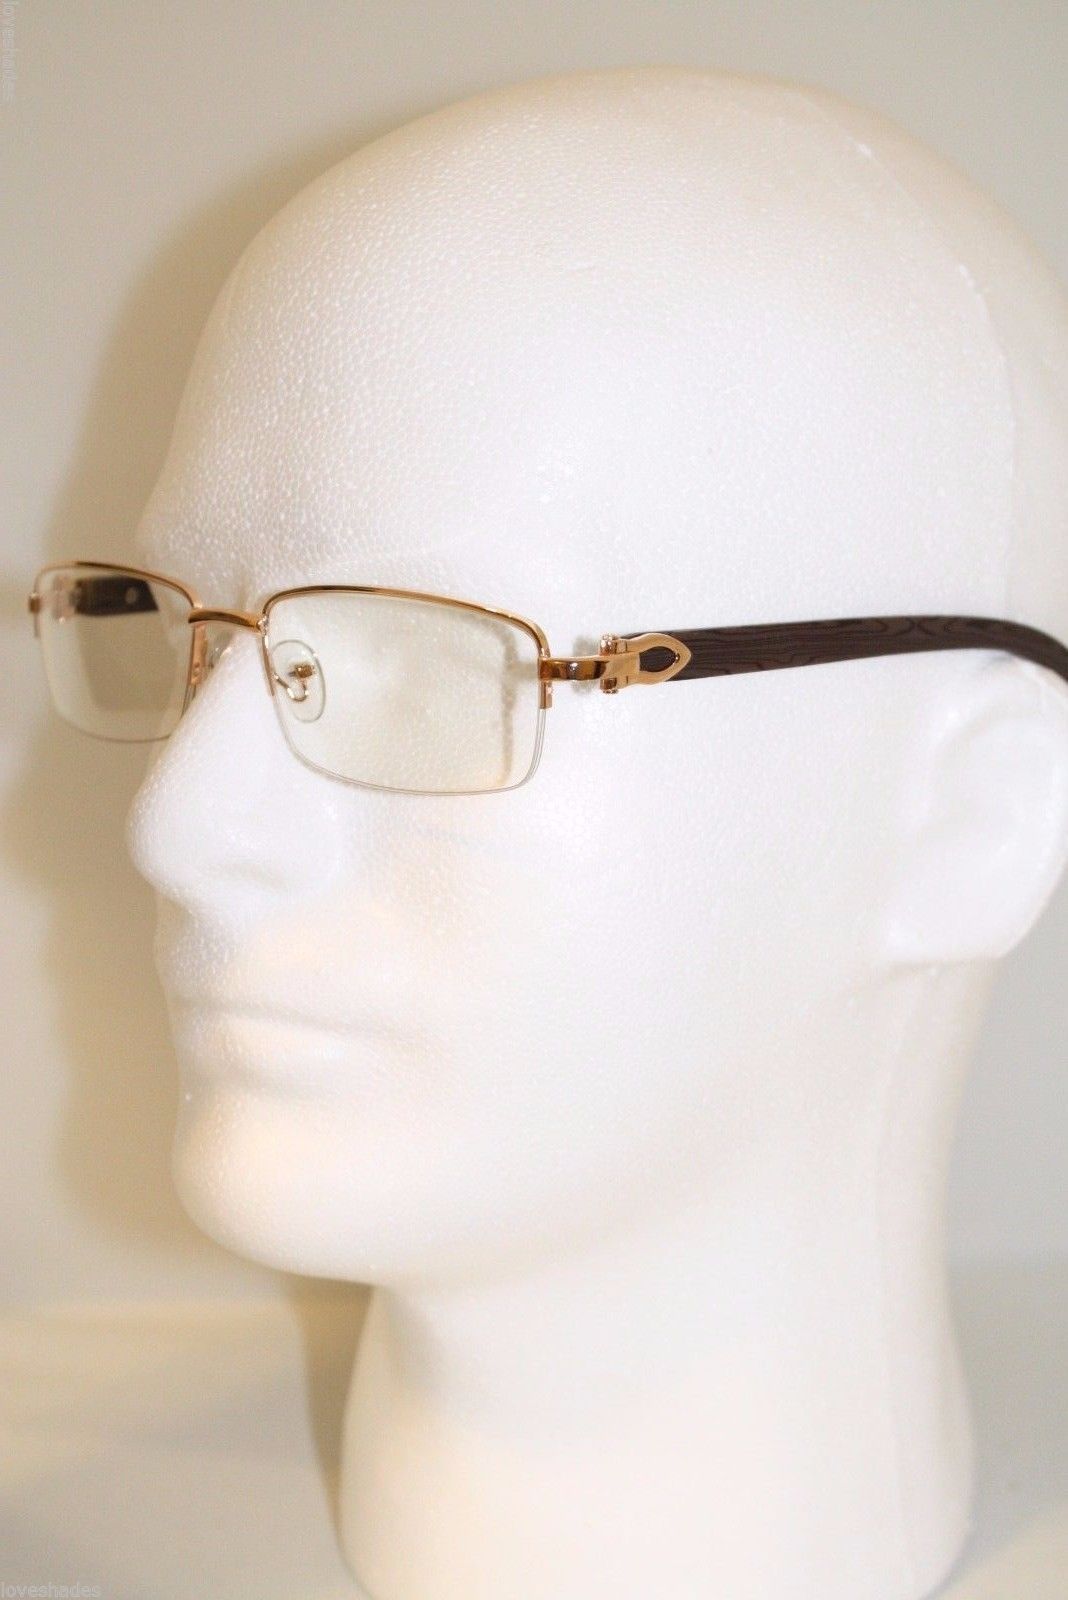 Cartier Style Wood Buffs Glasses Sunglasses and 14 similar items